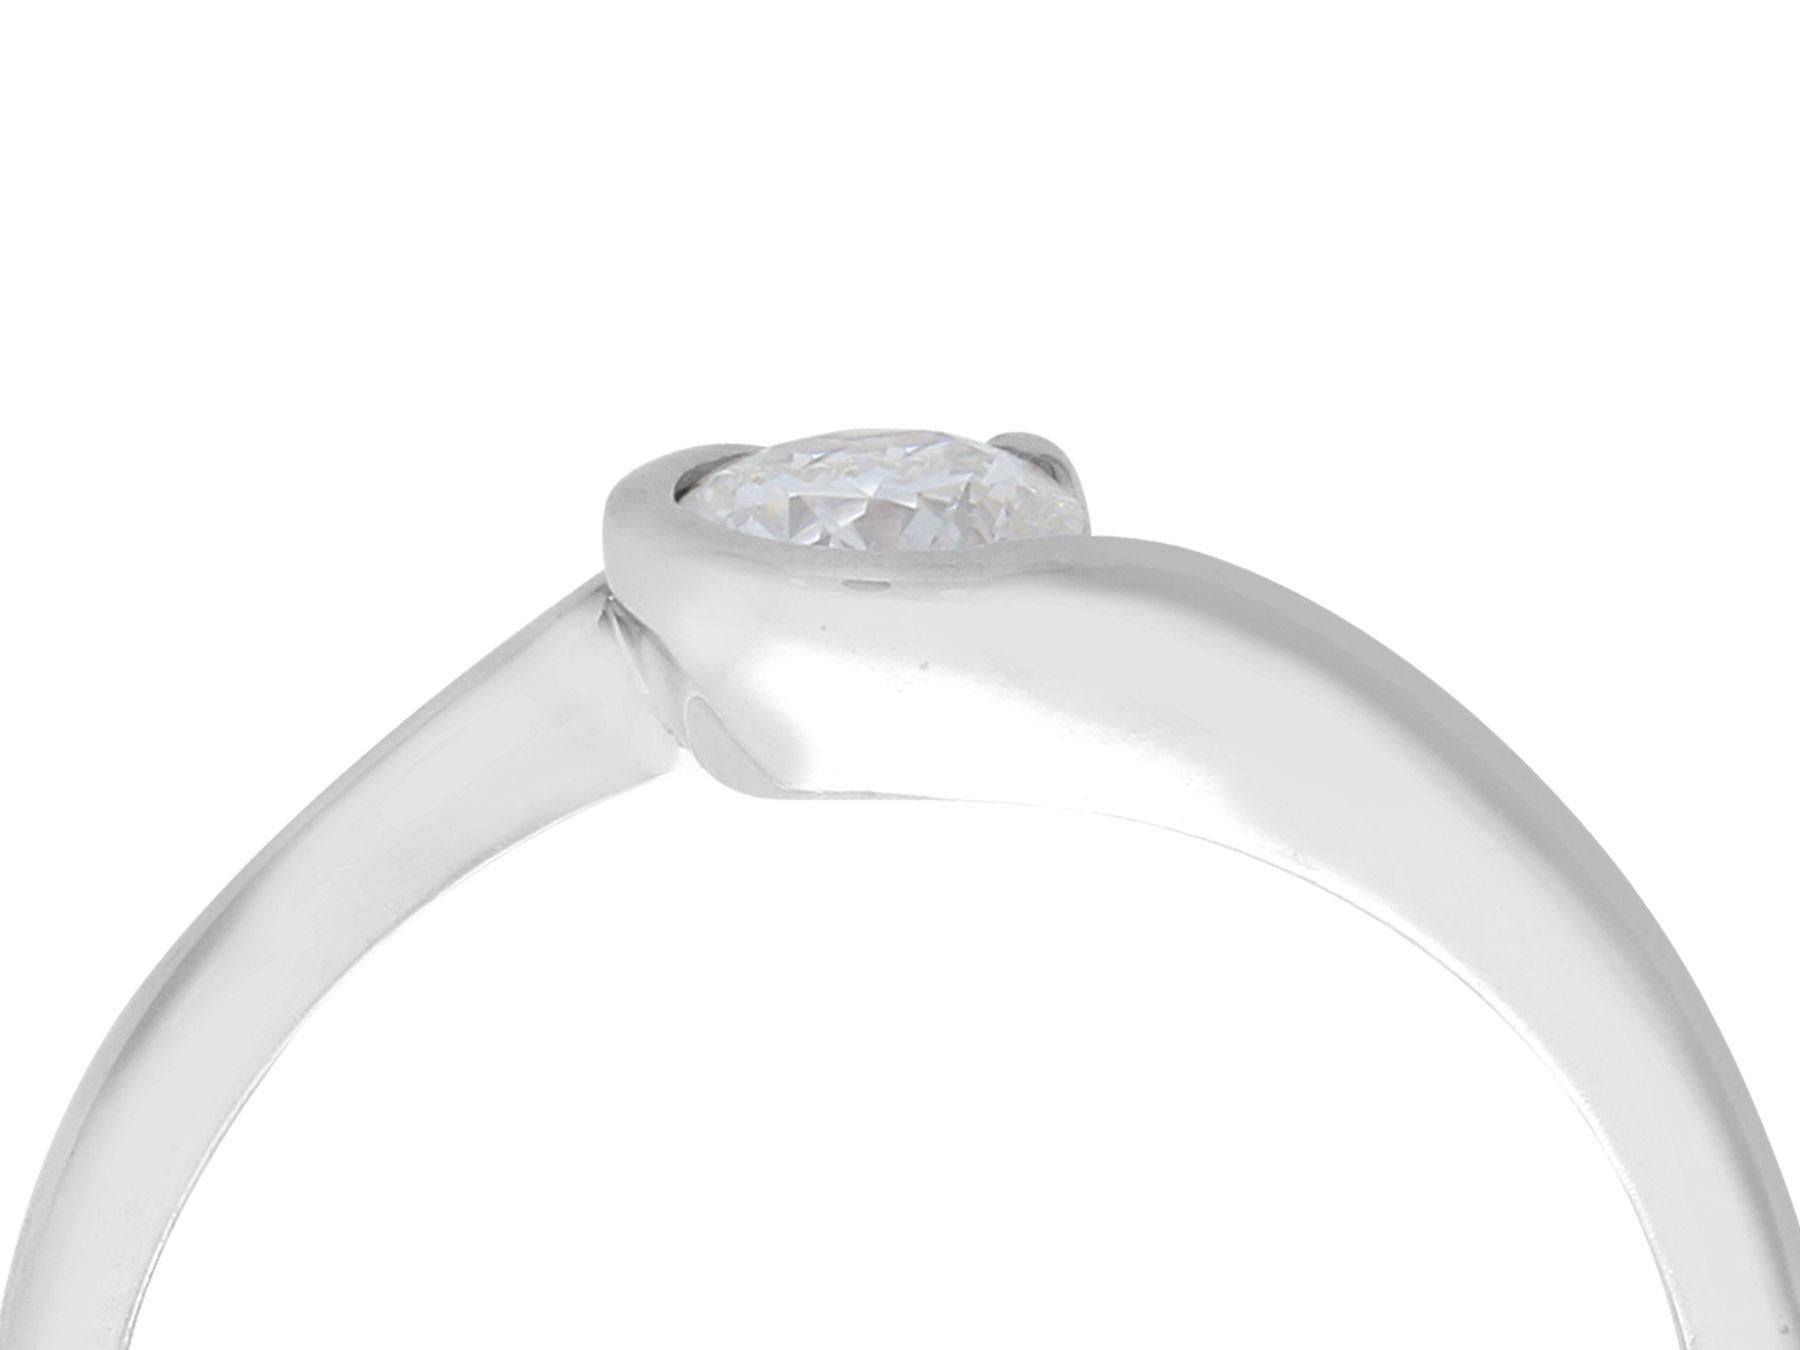 A fine and impressive contemporary 0.37 carat diamond and 18k white gold solitaire ring; part of our diverse diamond jewelry and estate jewelry collections

This fine and impressive diamond solitaire twist ring has been crafted in 18k white